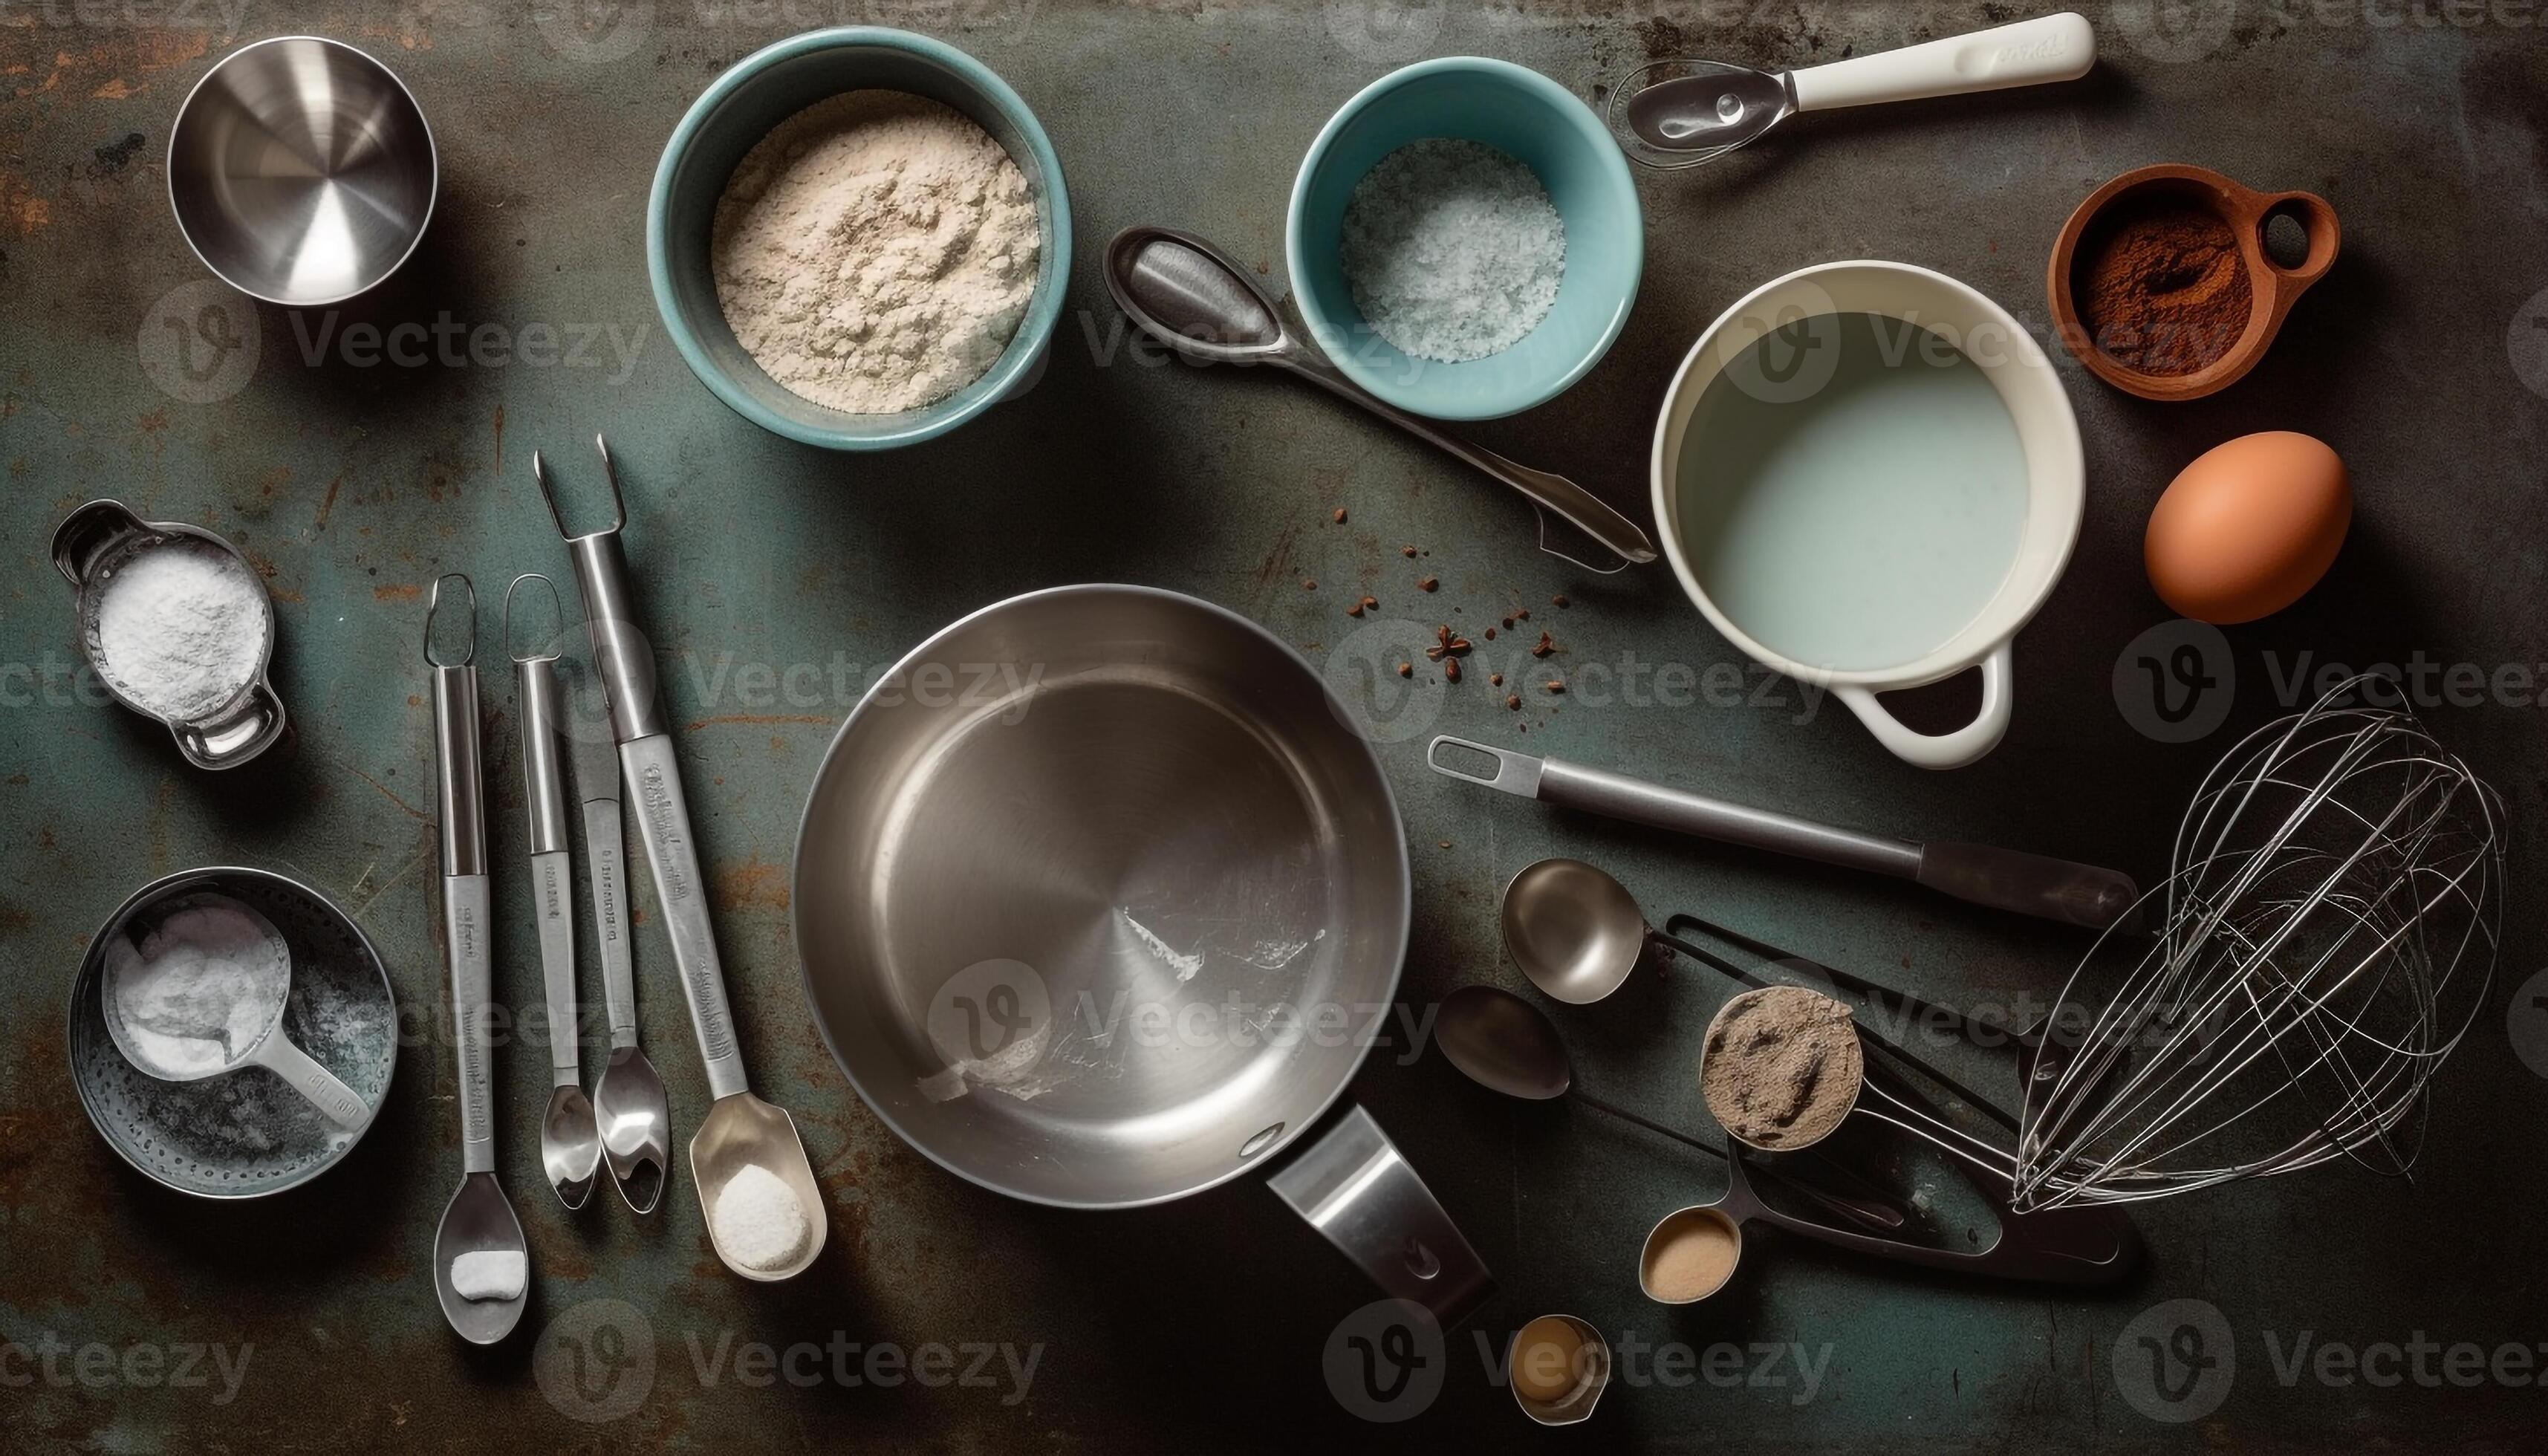 https://static.vecteezy.com/system/resources/previews/025/493/526/large_2x/a-rustic-still-life-of-homemade-baking-equipment-and-ingredients-generated-by-ai-photo.jpg